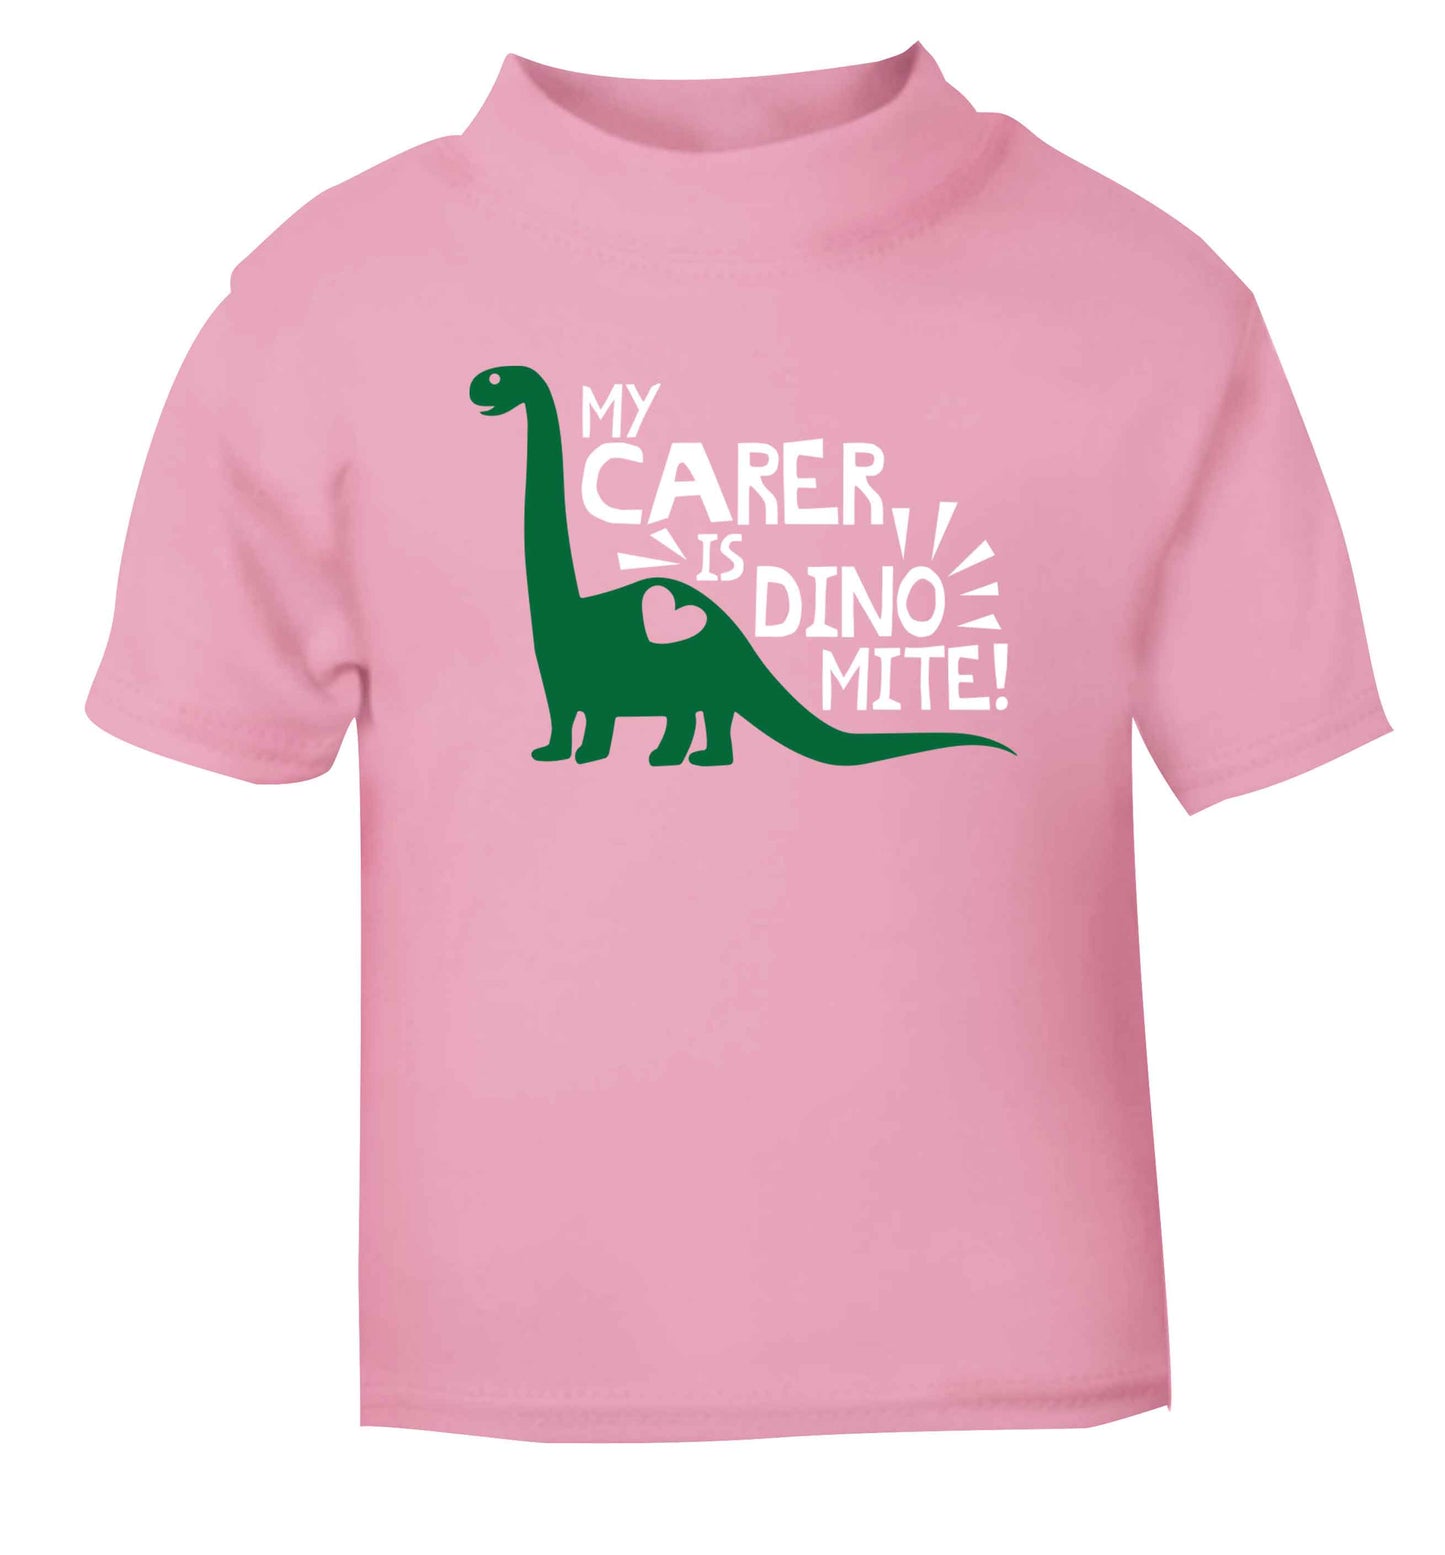 My carer is dinomite! light pink Baby Toddler Tshirt 2 Years